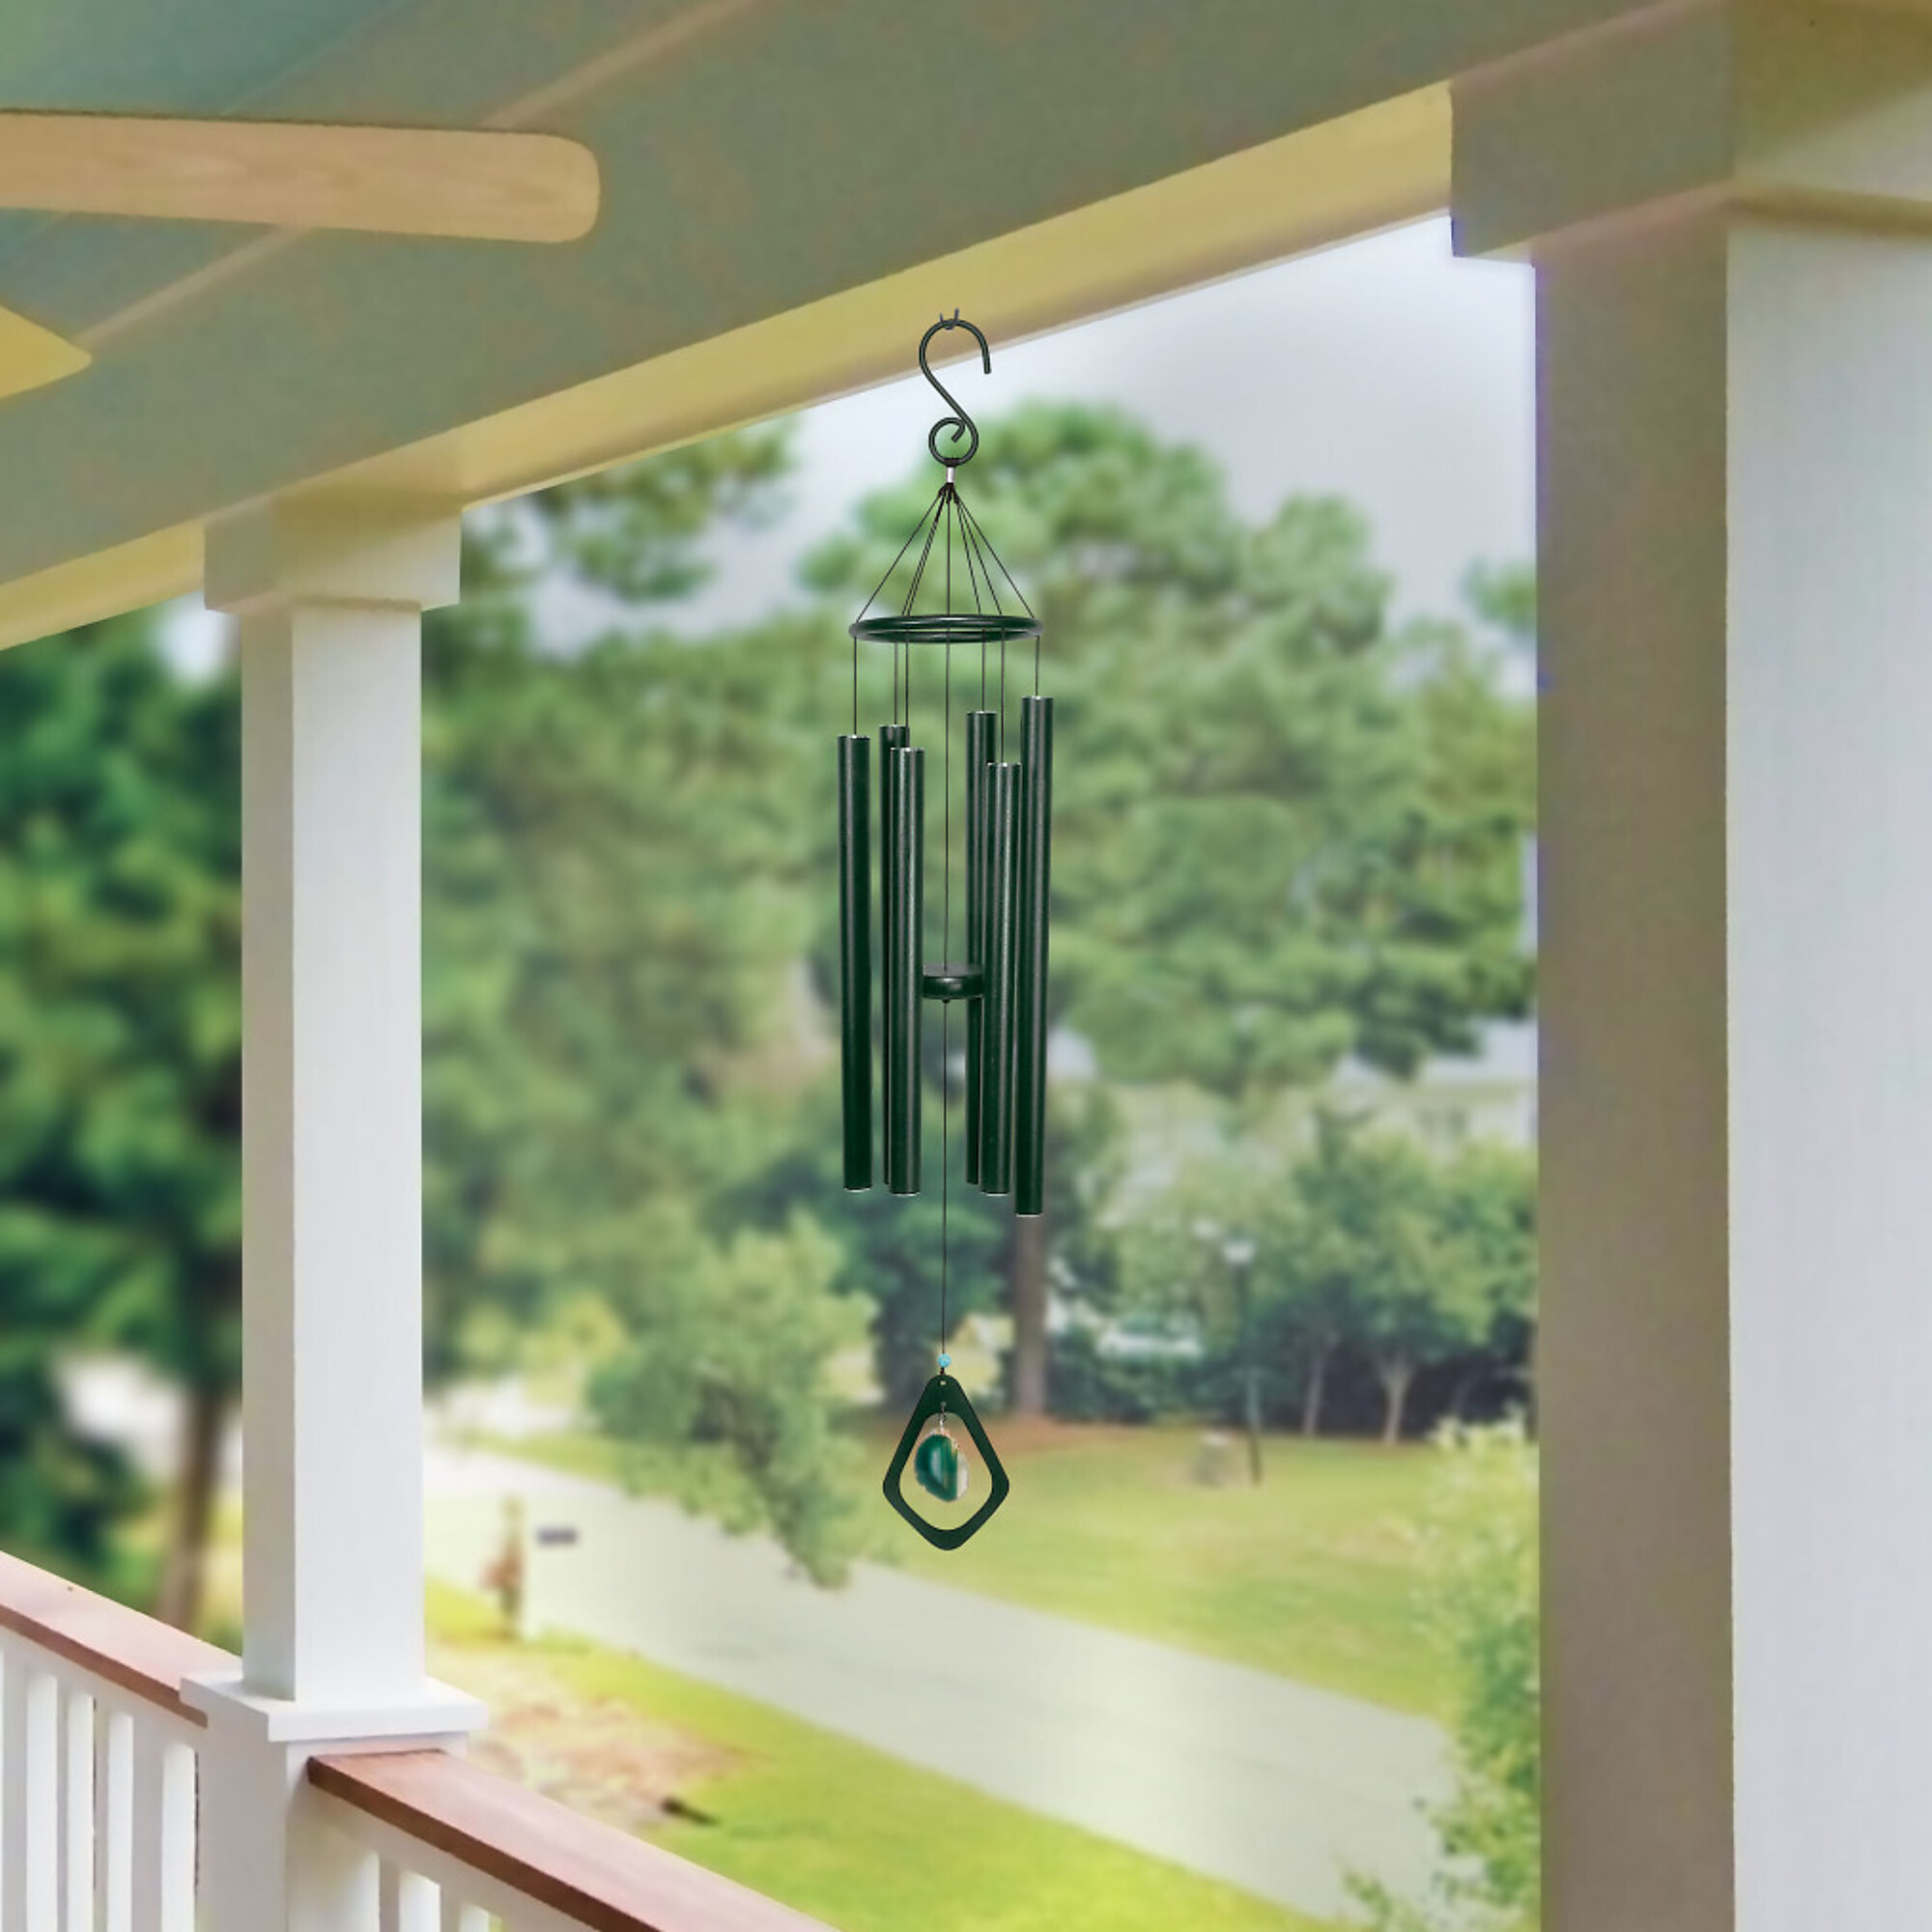 Alpine Corporation, Green Metal Windchime with Green Gemstone 39Inch, Model KAW122HH-GN